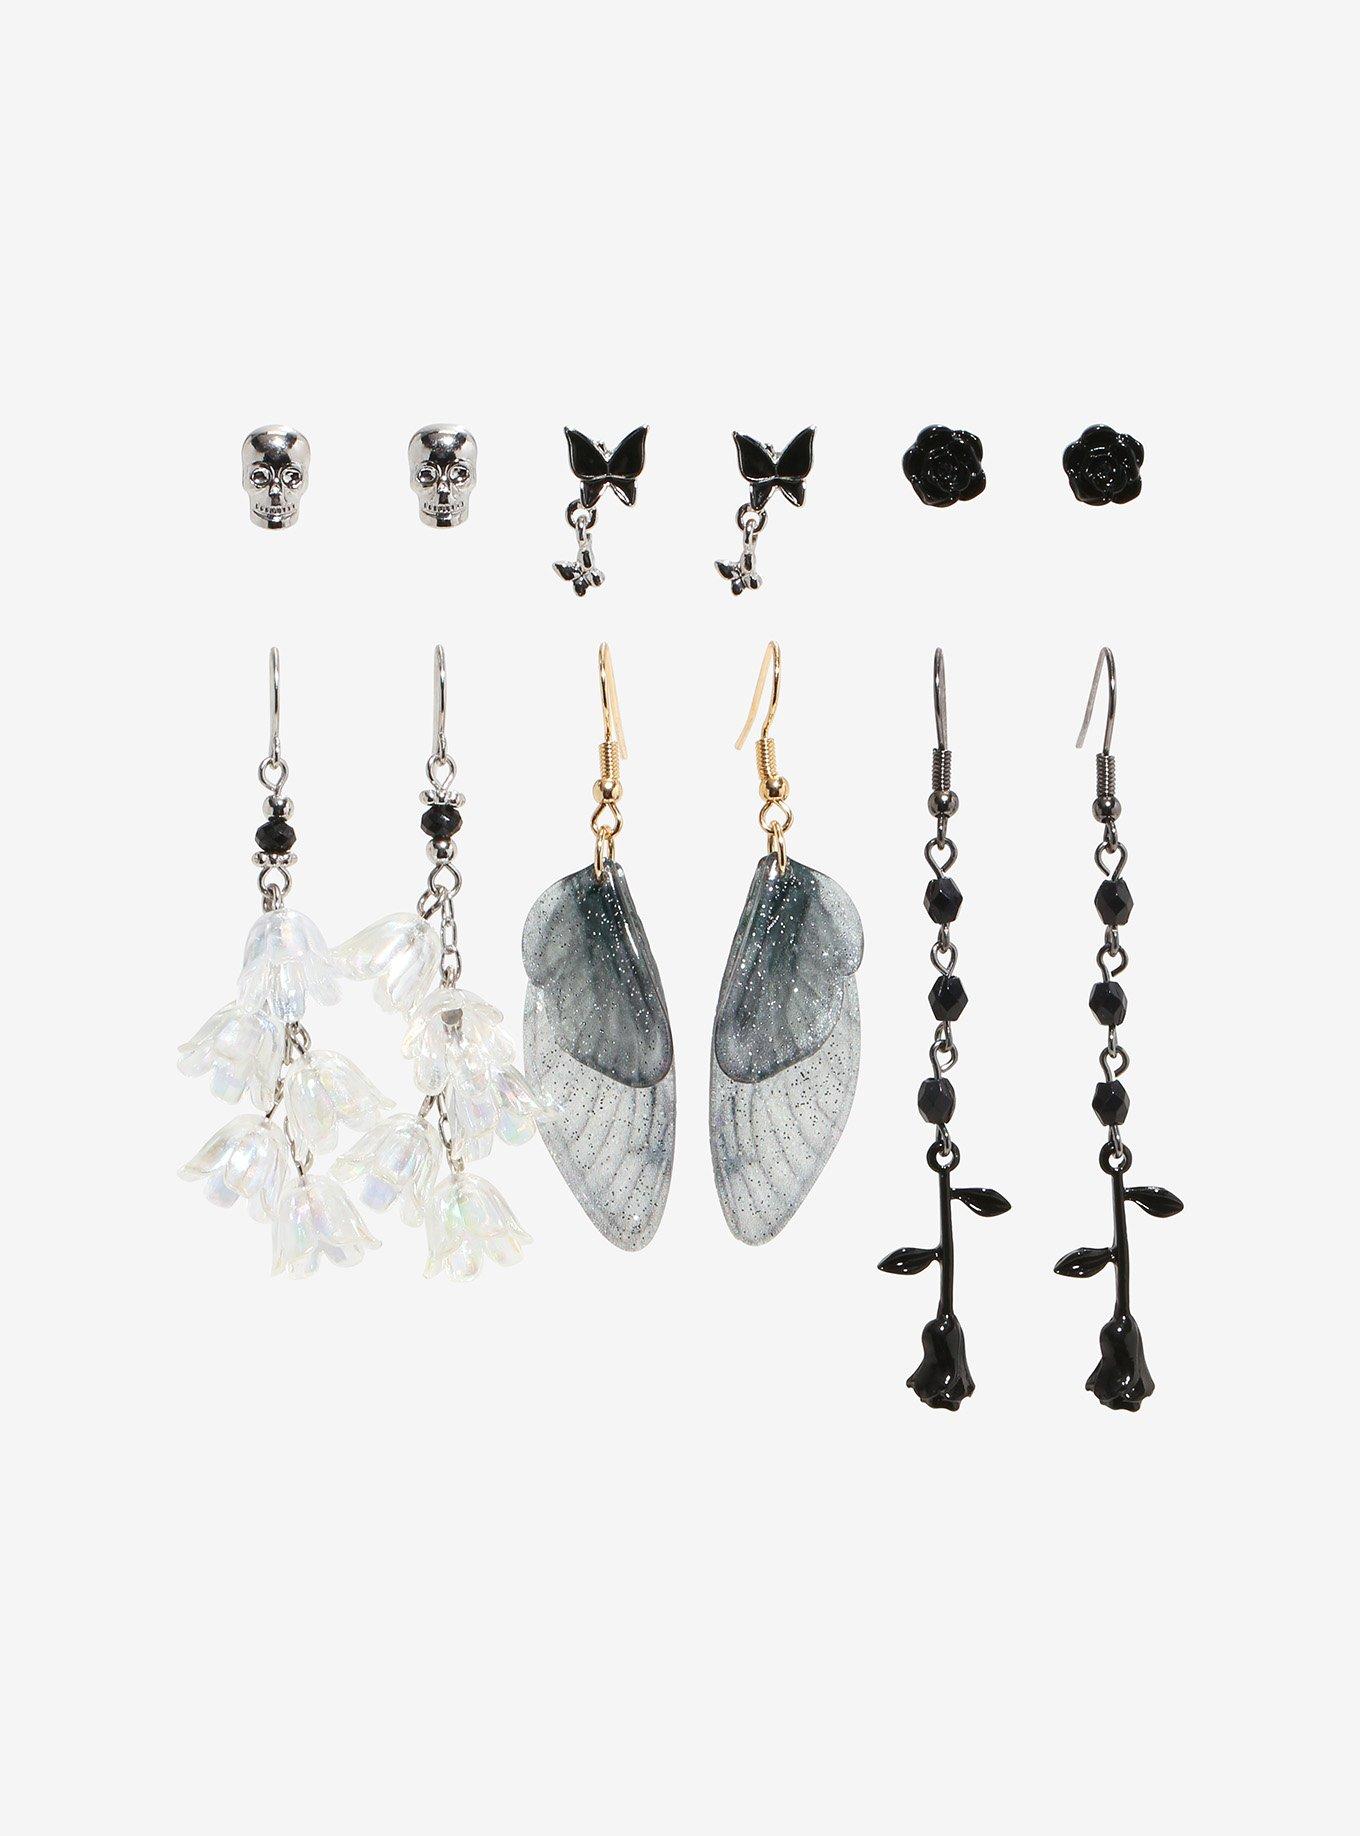 Thorn & Fable Black Rose Wing Earring Set, , hi-res